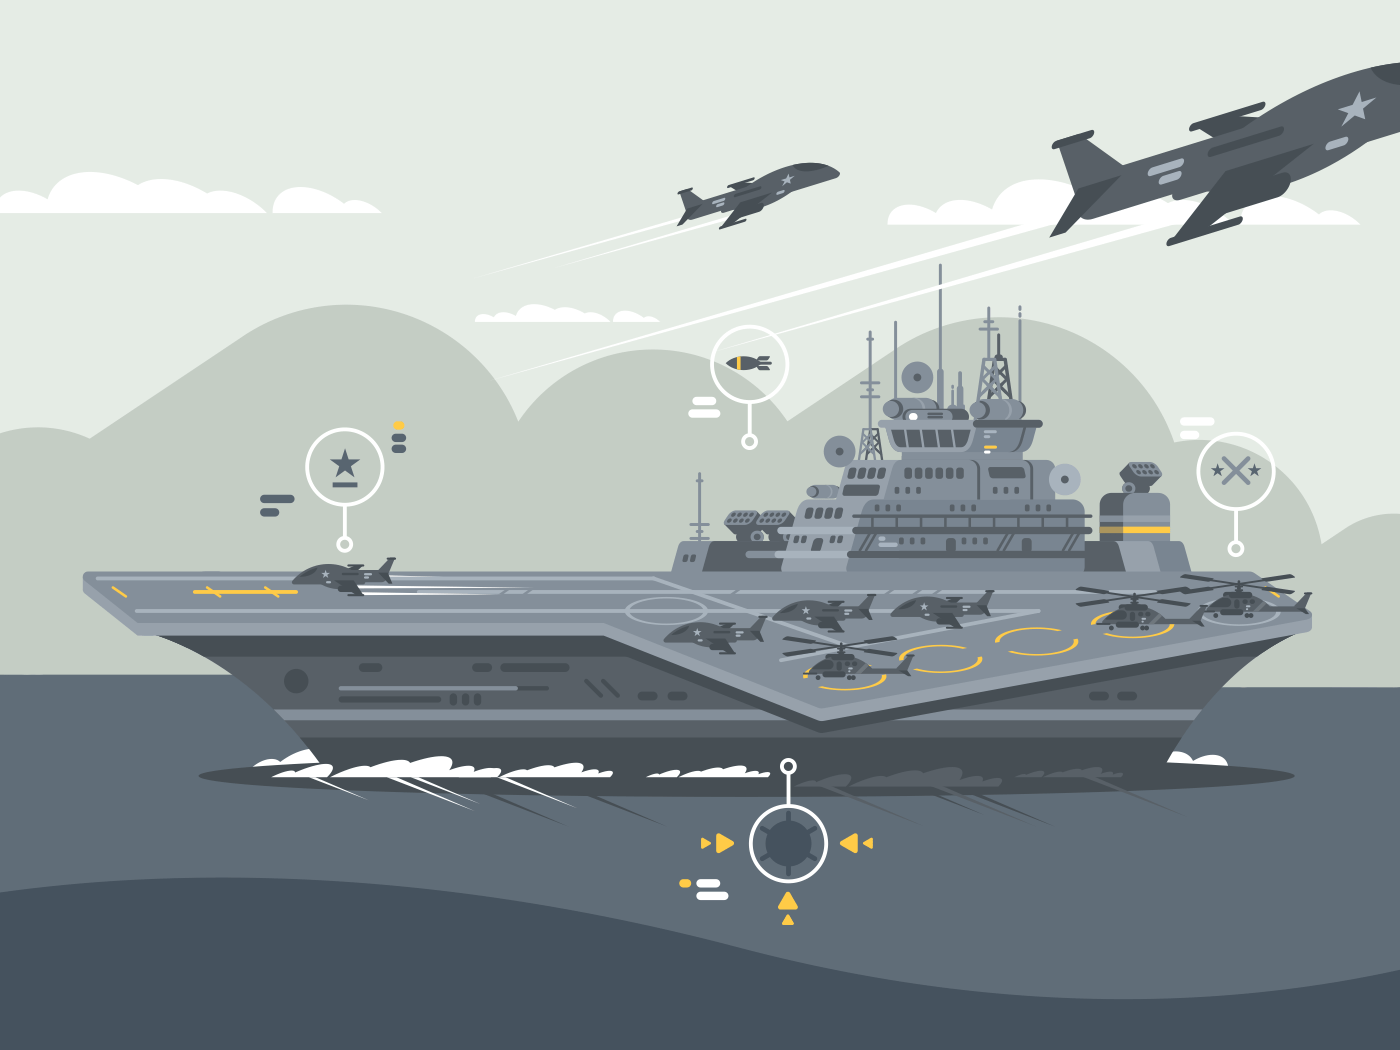 Military aircraft carrier. Huge warship with airplanes and helicopters. Vector illustration